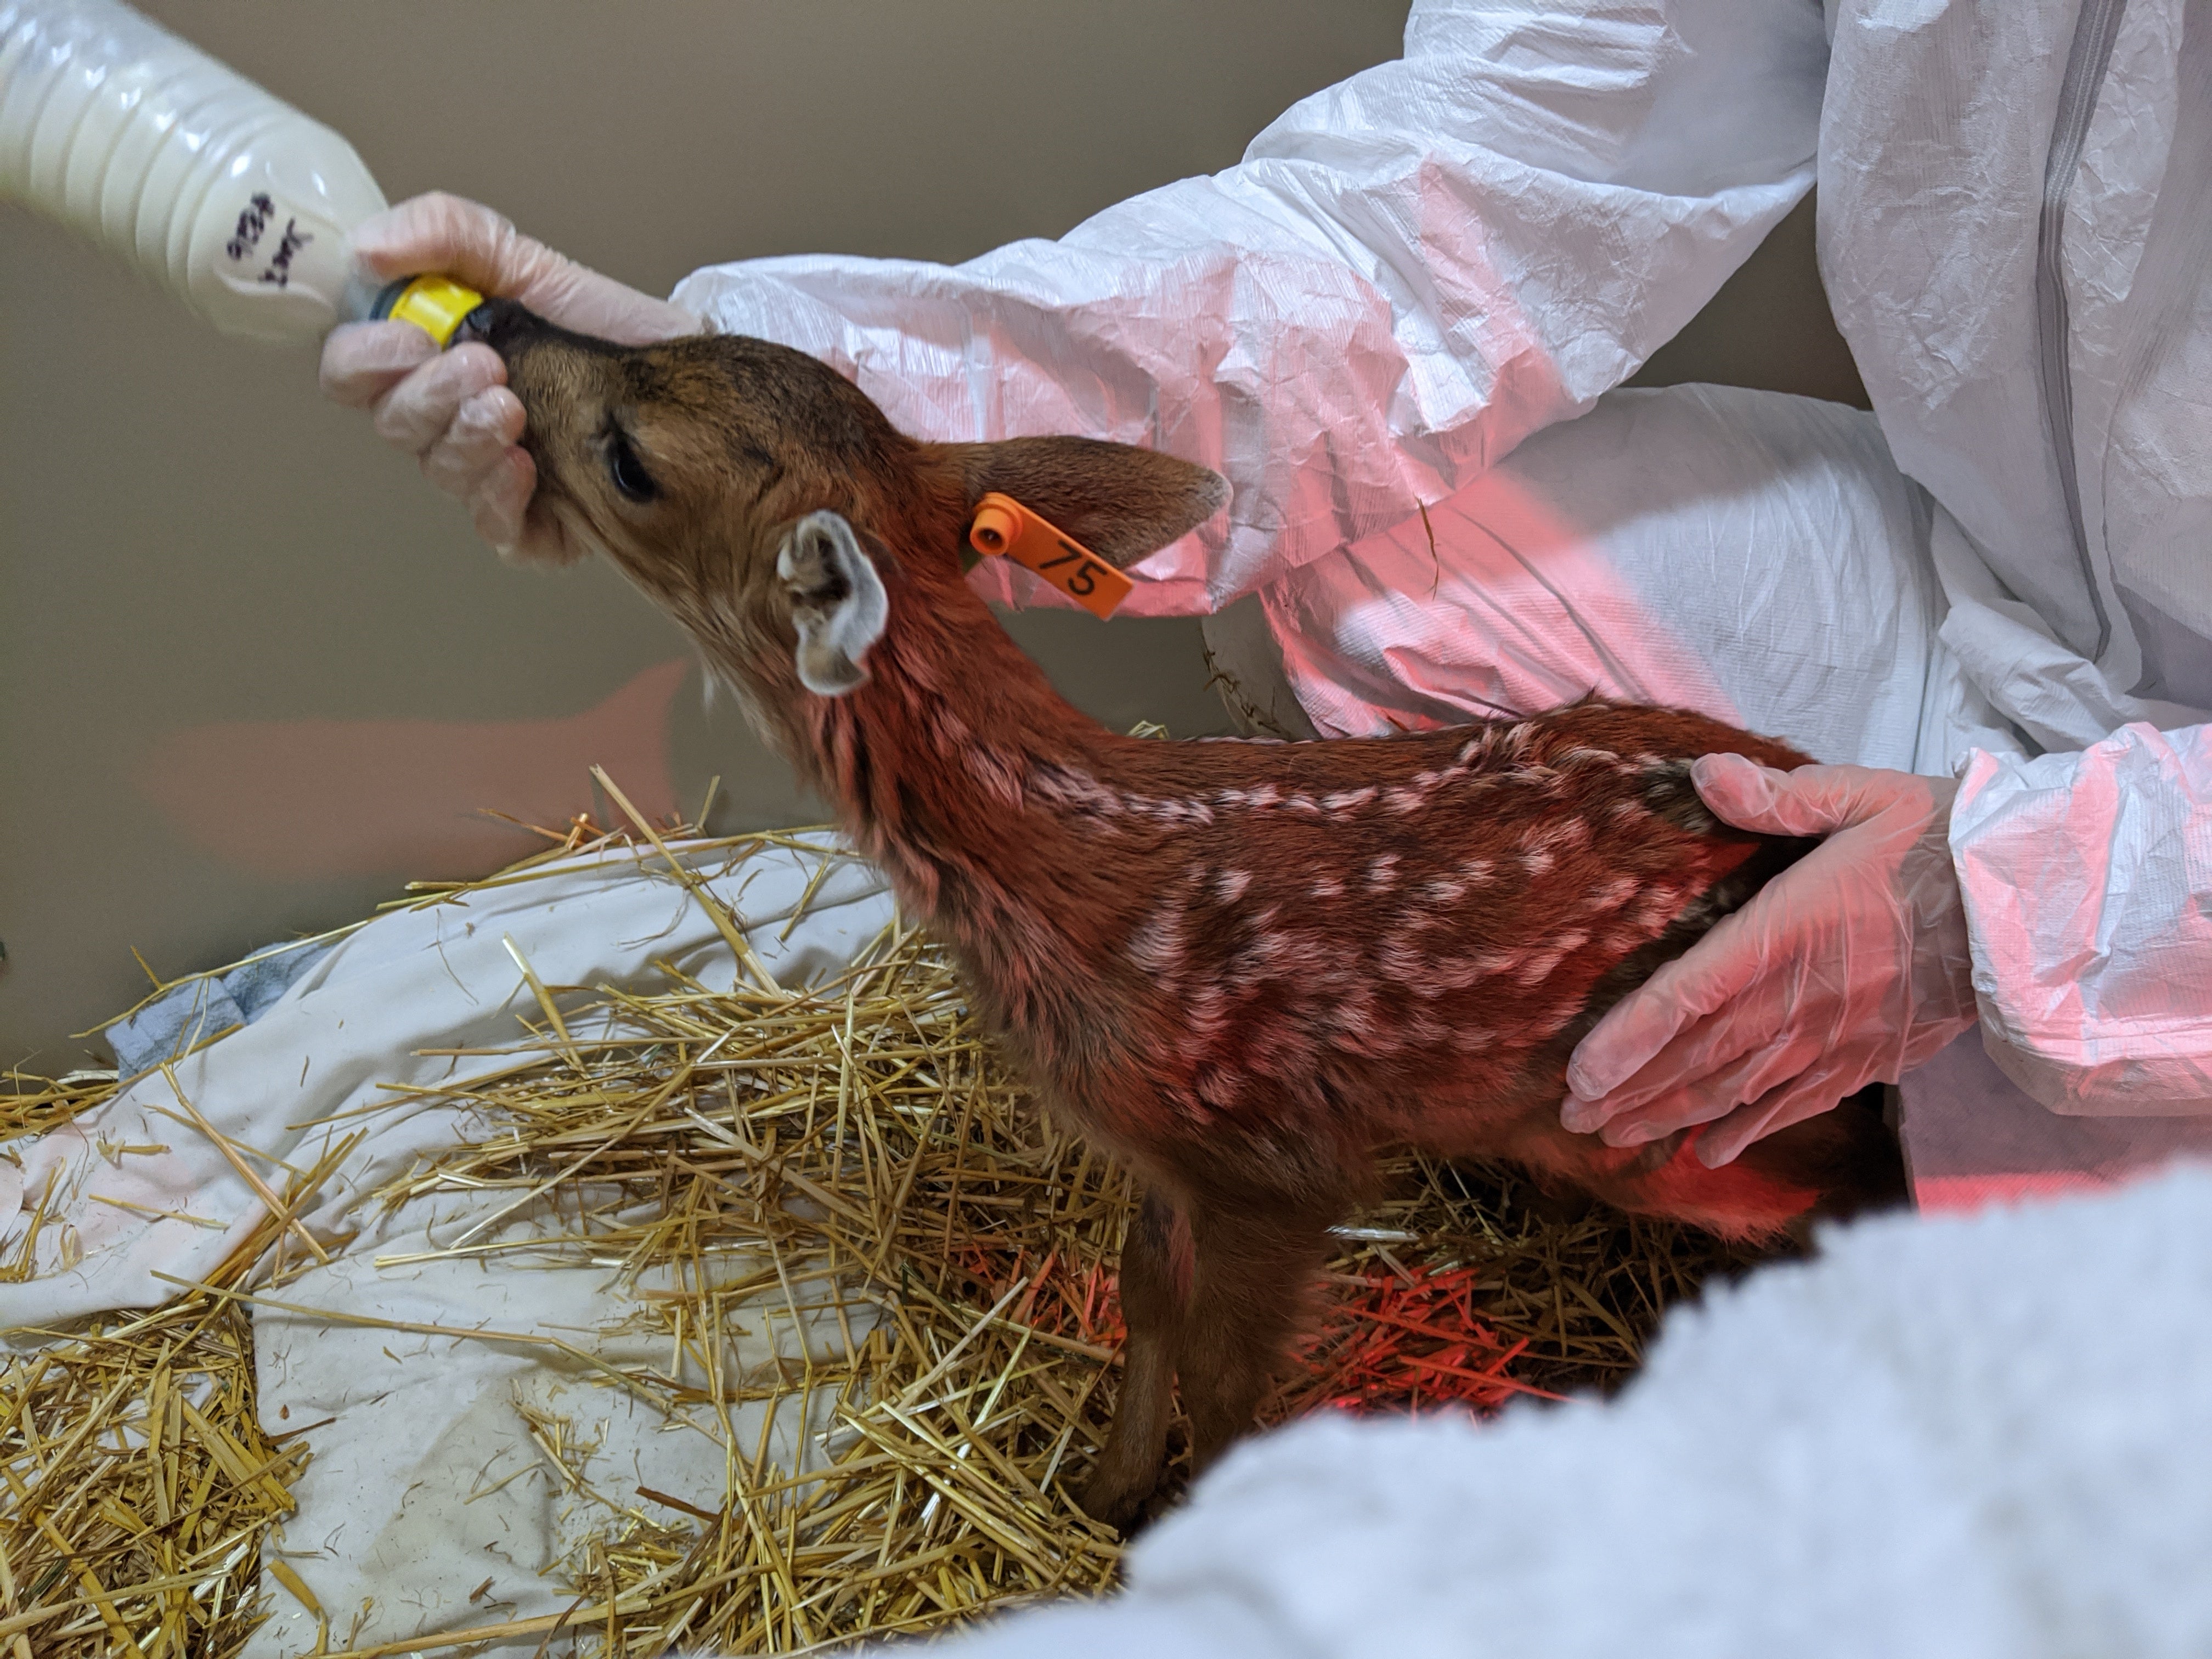 Young deer fawn being bathed during rehabilitation and medical